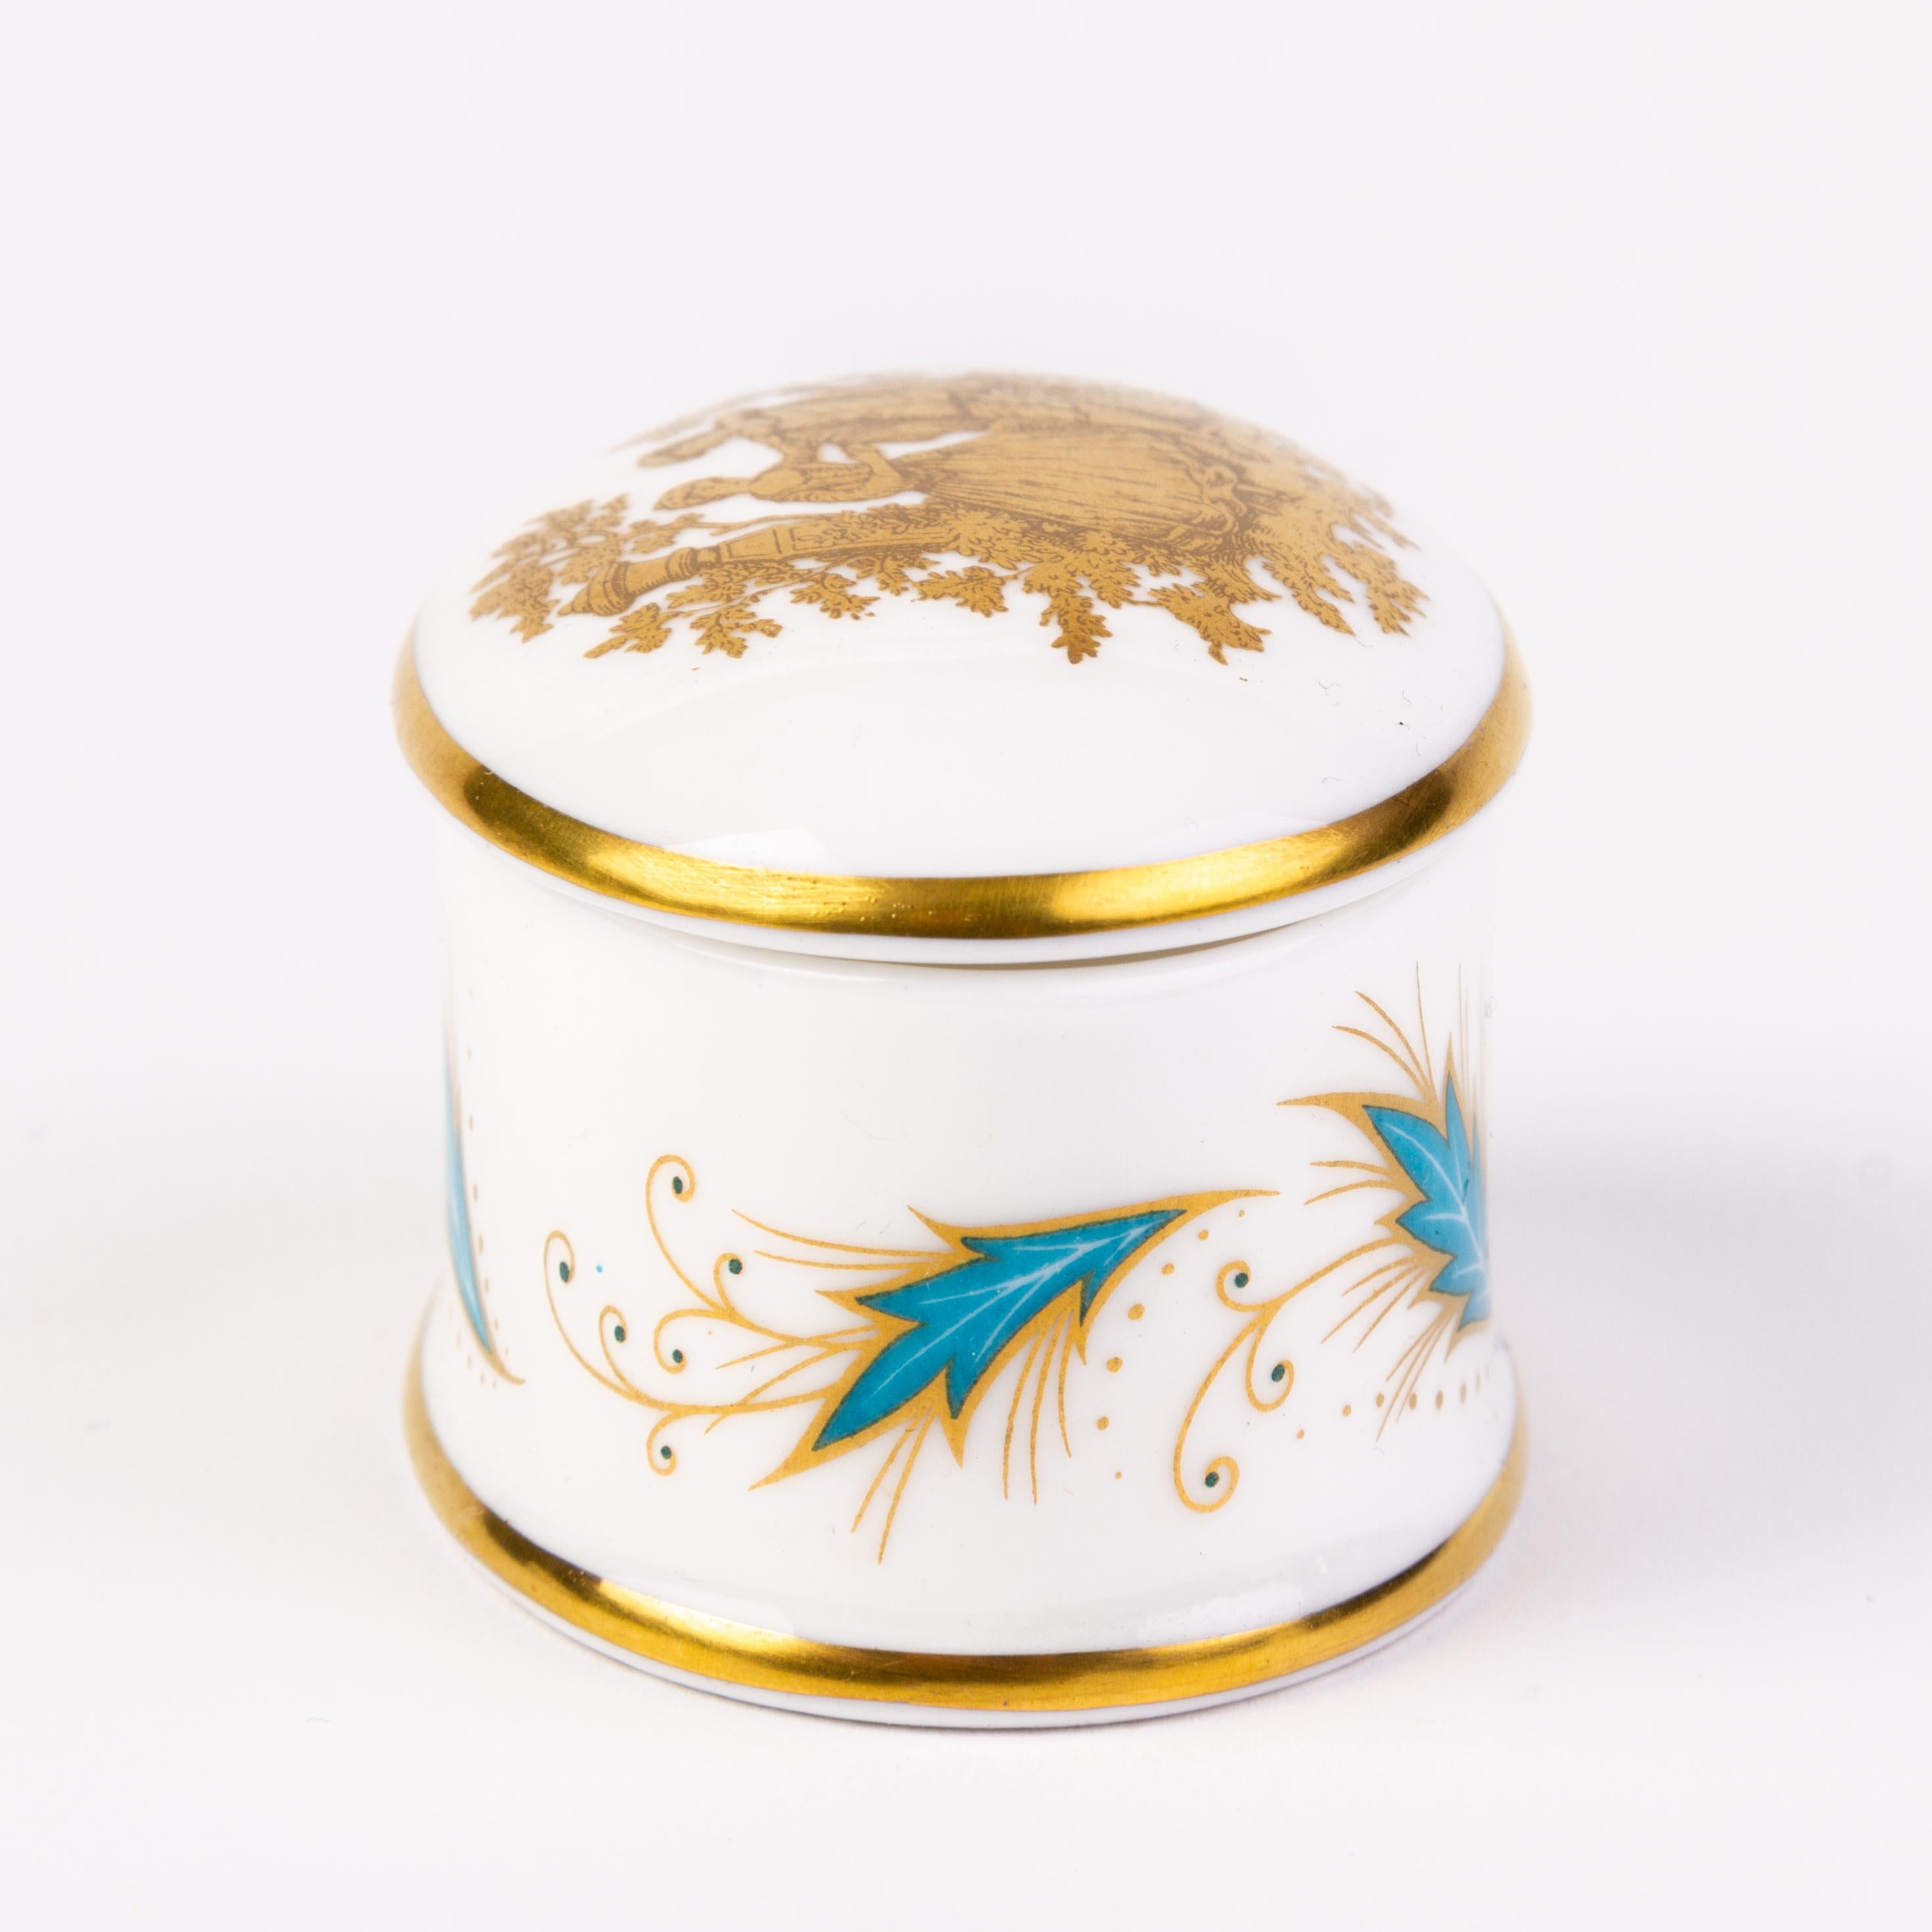 In good condition
From a private collection
Crown Staffordshire Gilt Porcelain Romantic Lidded Box 